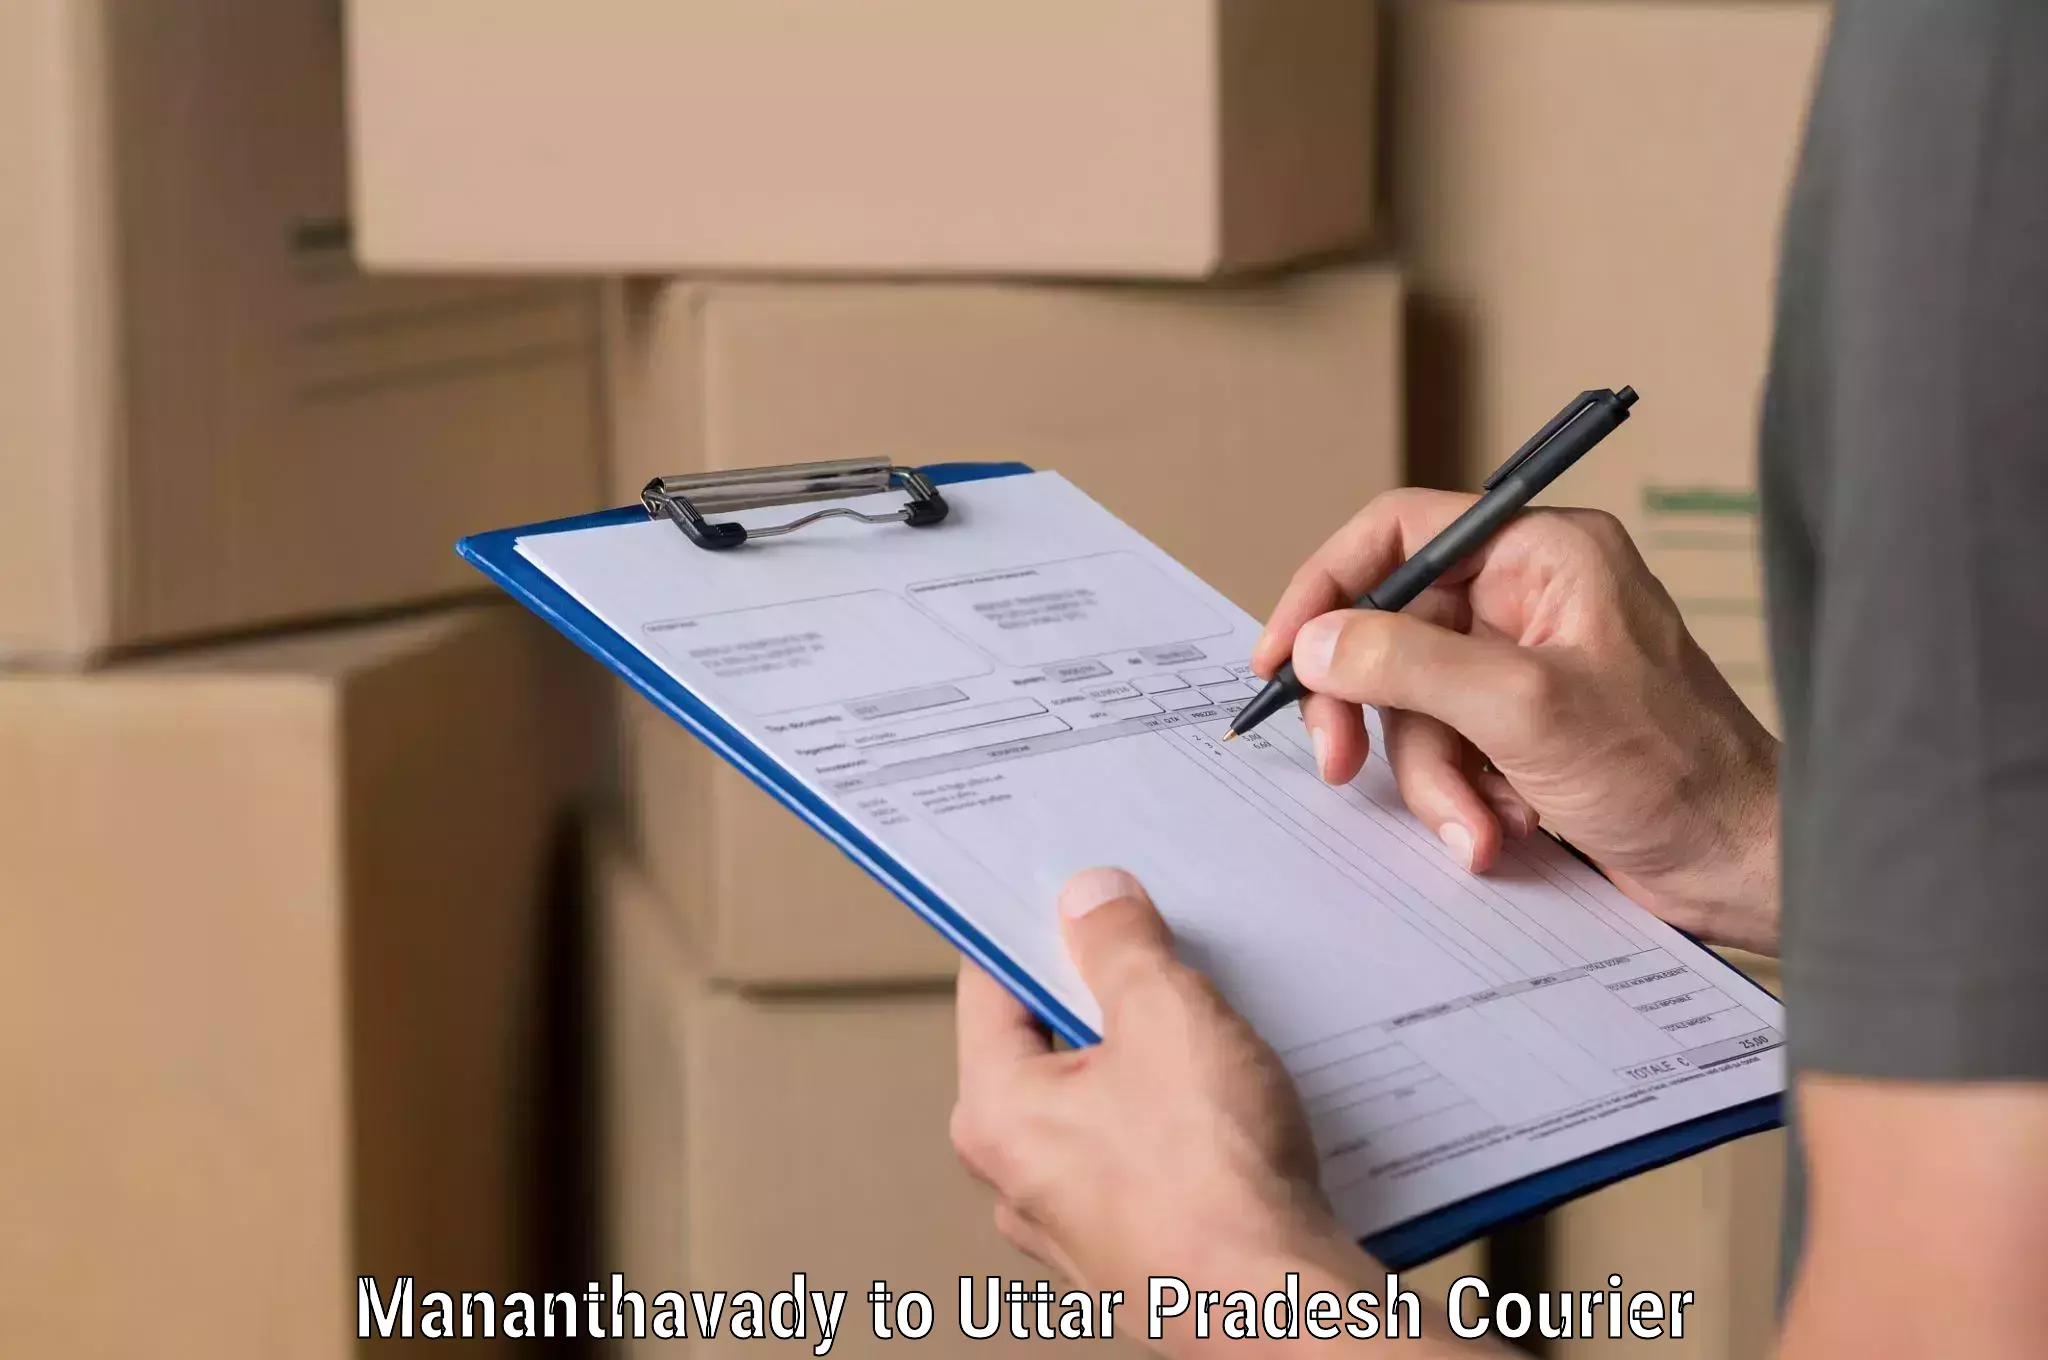 Express delivery capabilities Mananthavady to Agra